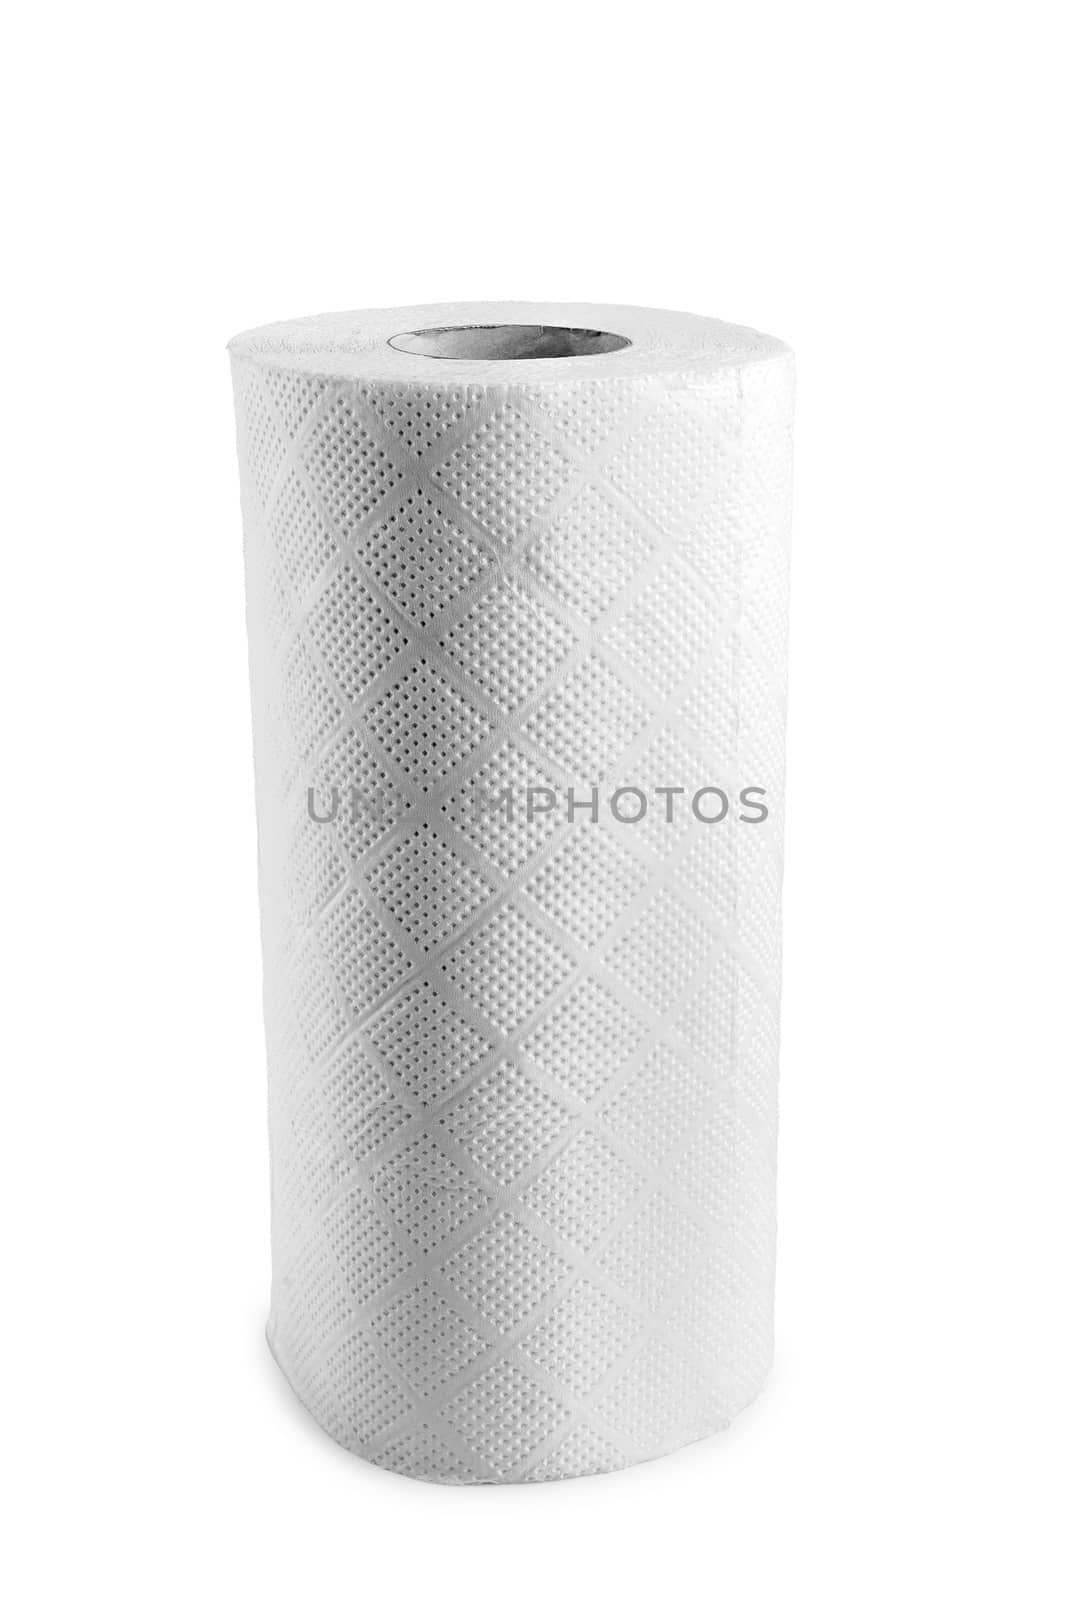 Cleaning Paper Towel Roll by MaxalTamor